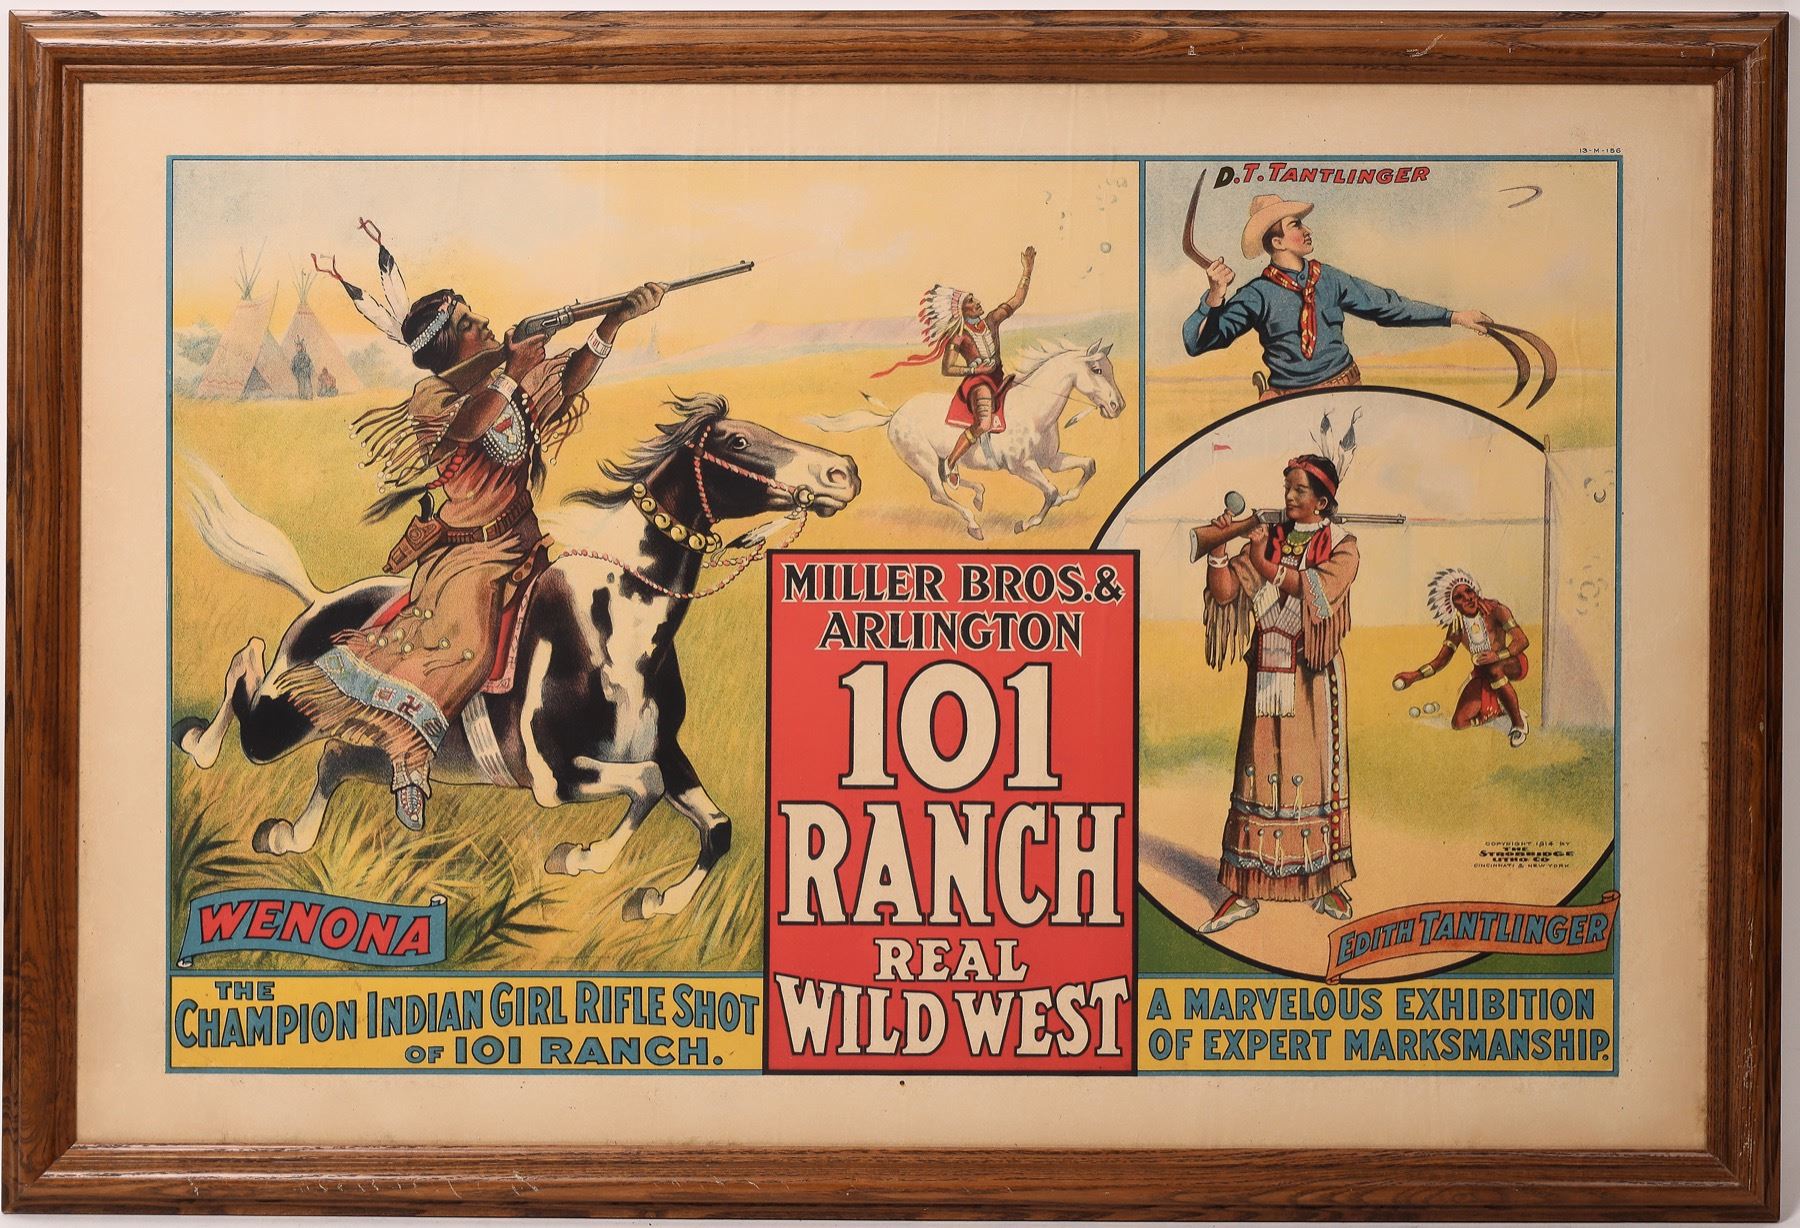 101 Ranch Real Wild West poster, est. $5,000-$10,000